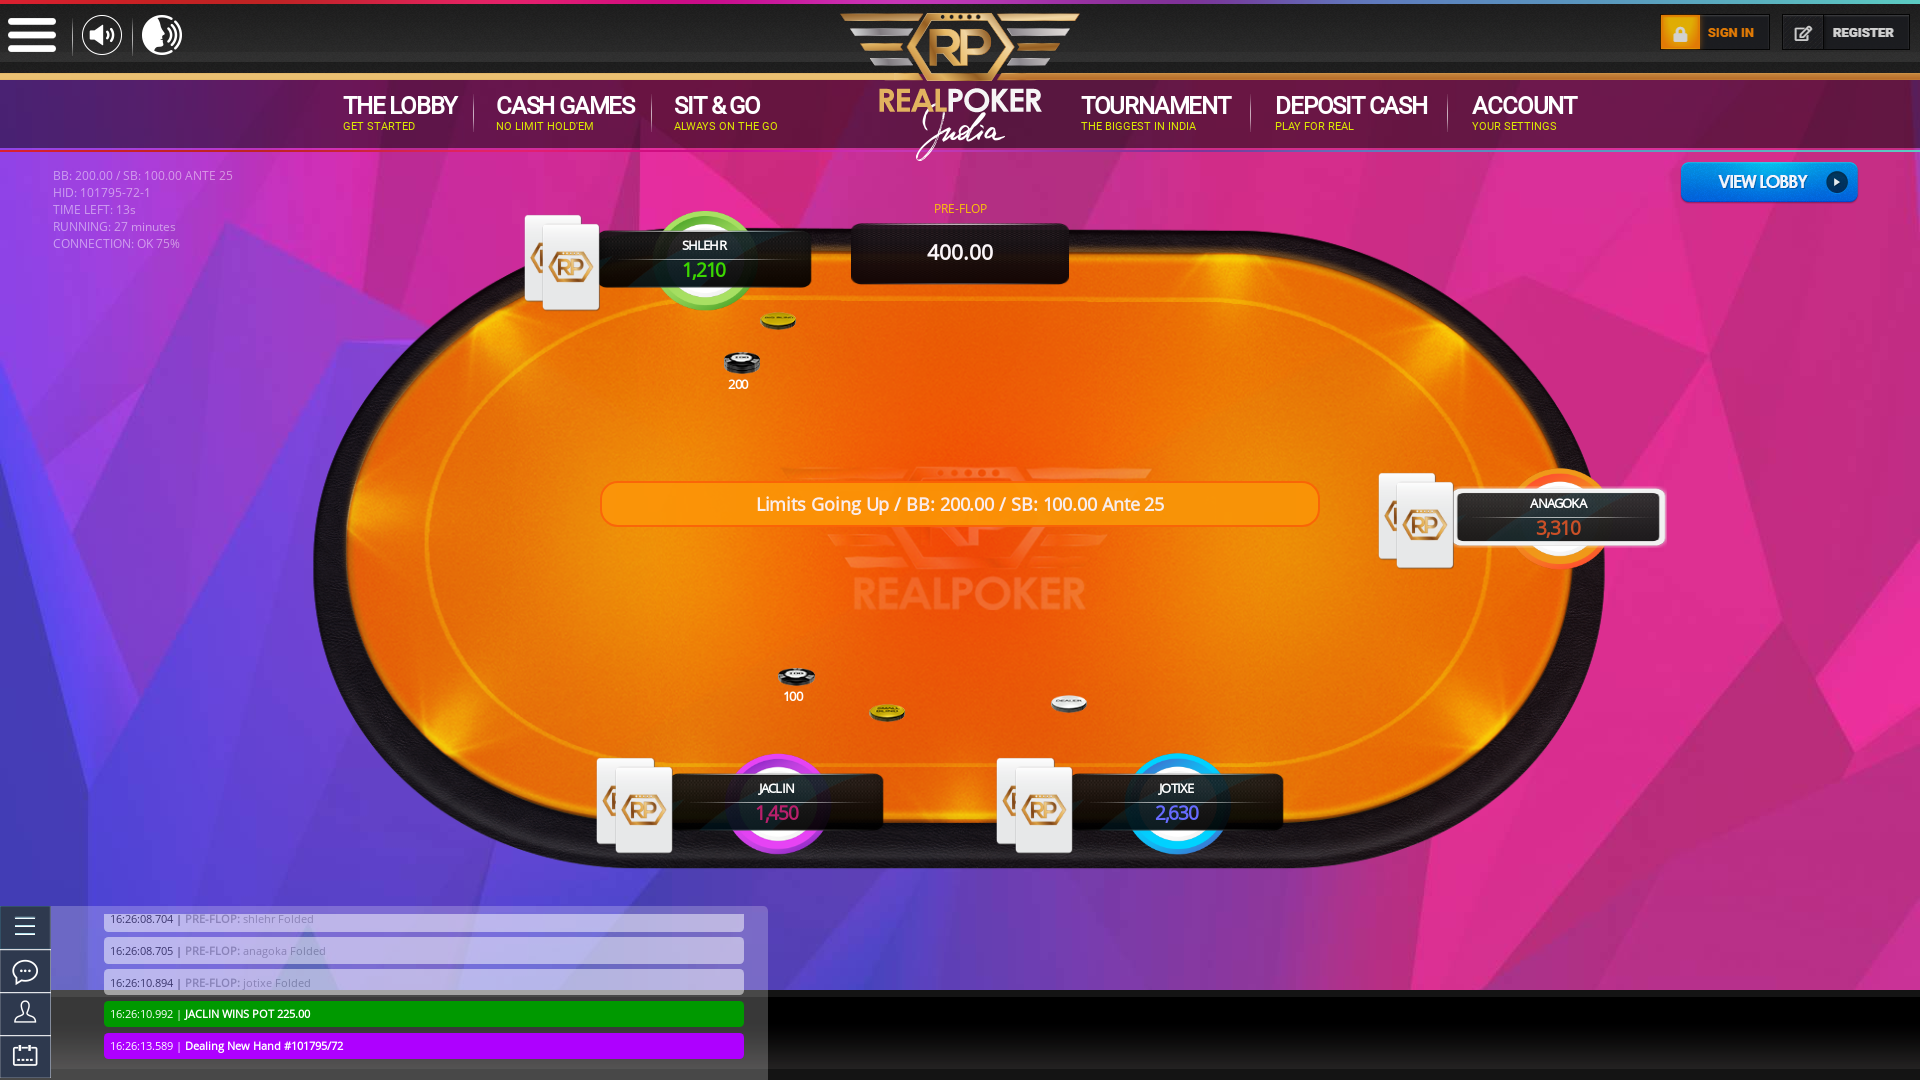 Goa online poker game on a 6 player table in the 26th minute of the match